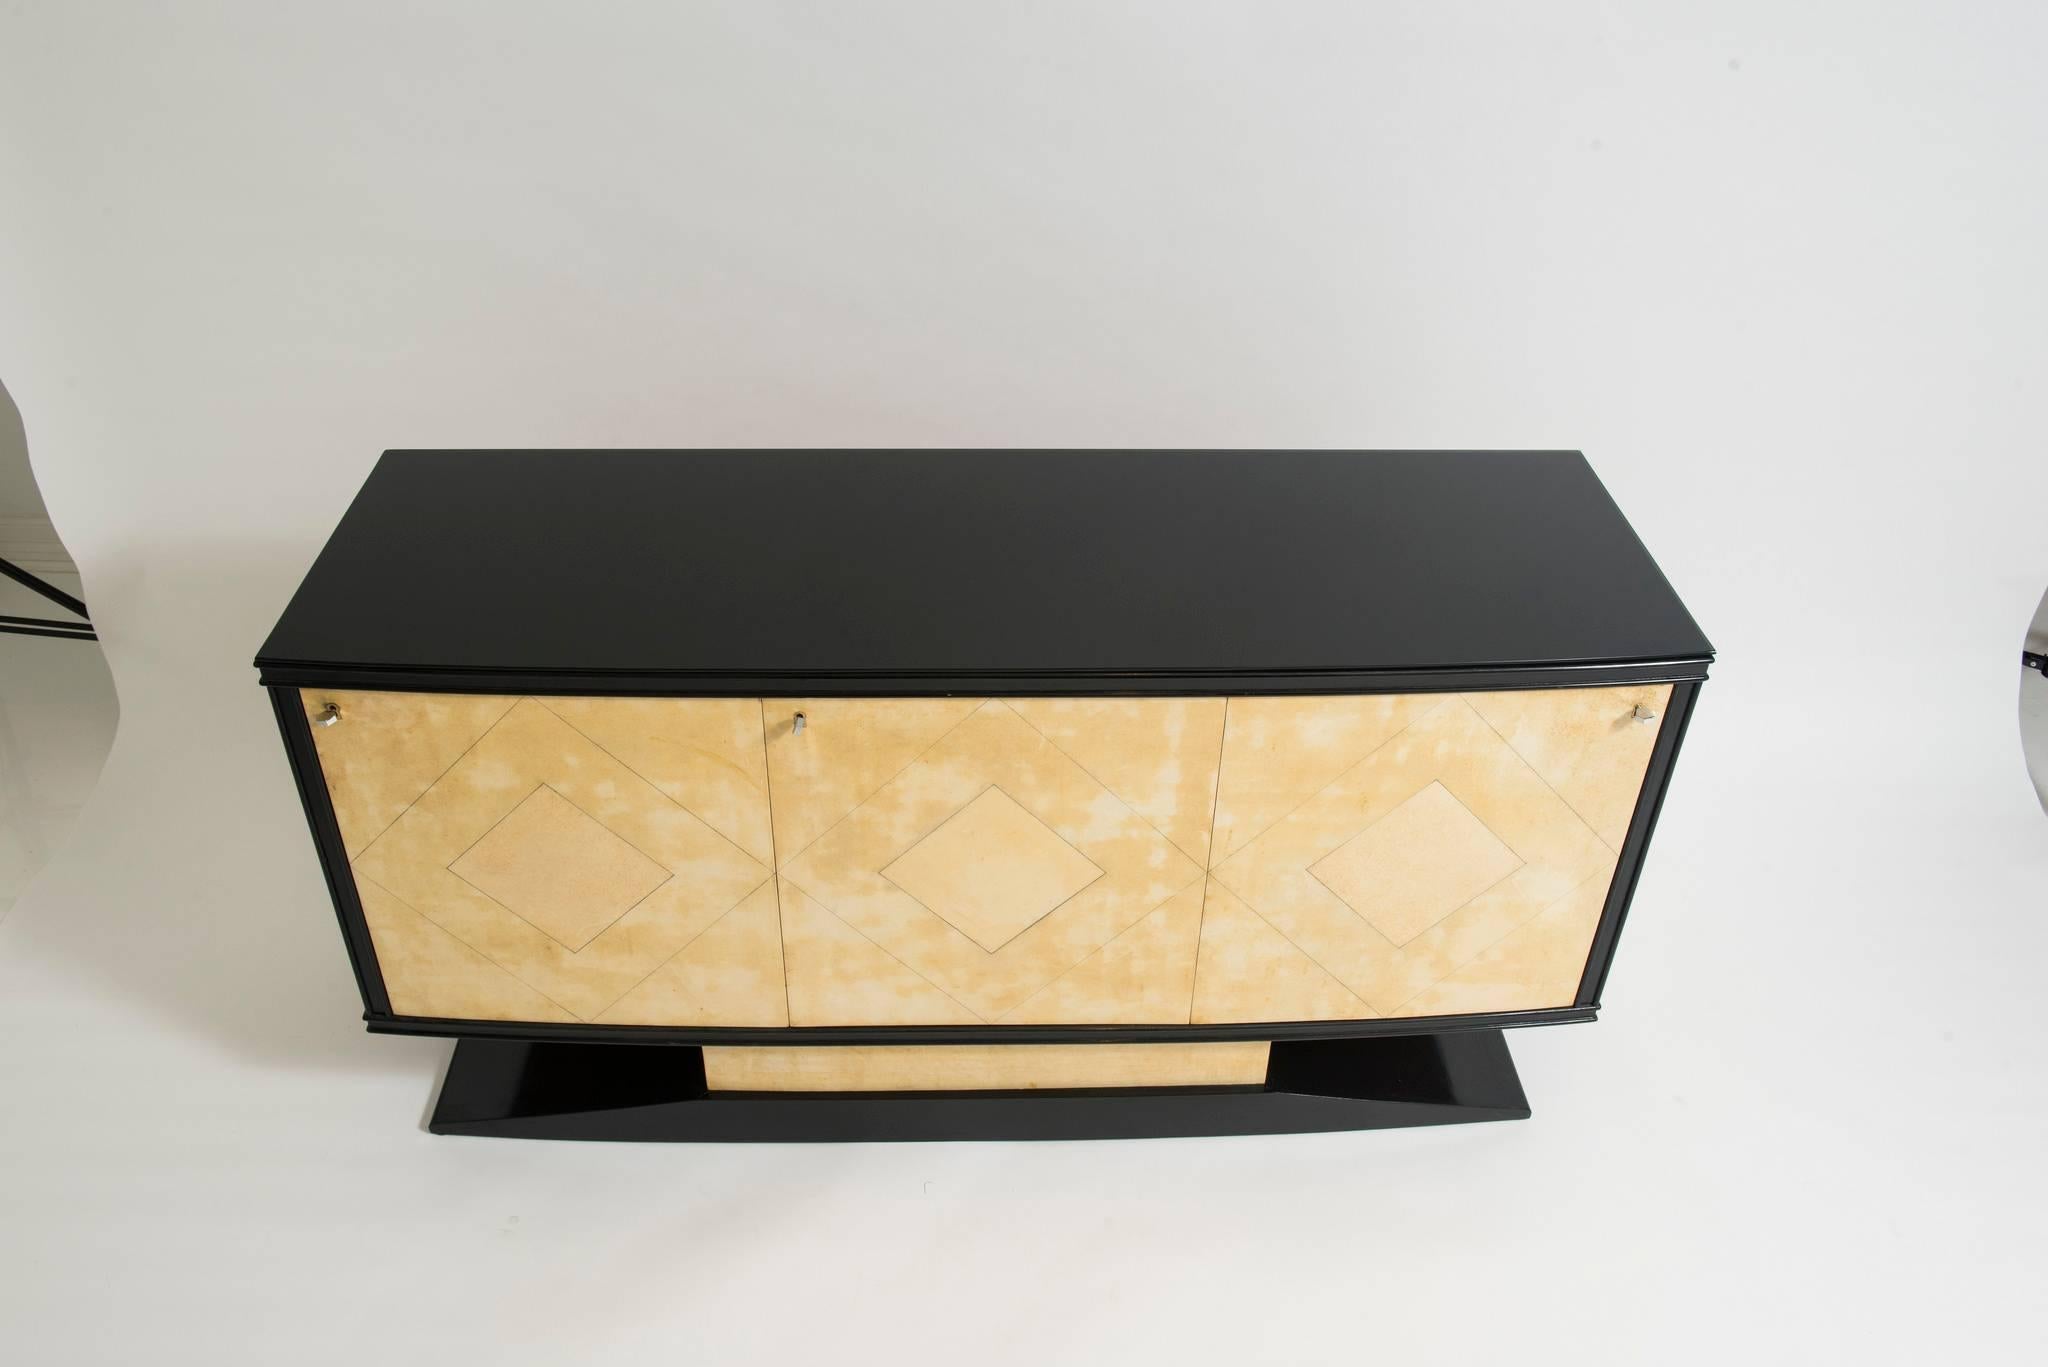 A three-door Art Deco credenza by Vittorio Dassi, Milan, circa 1940s.
This beautiful Maplewood server features four centre drawers, bronze key escutcheons and bronze pulls. The cabinet frame and base are black lacquered topped with a piece of black